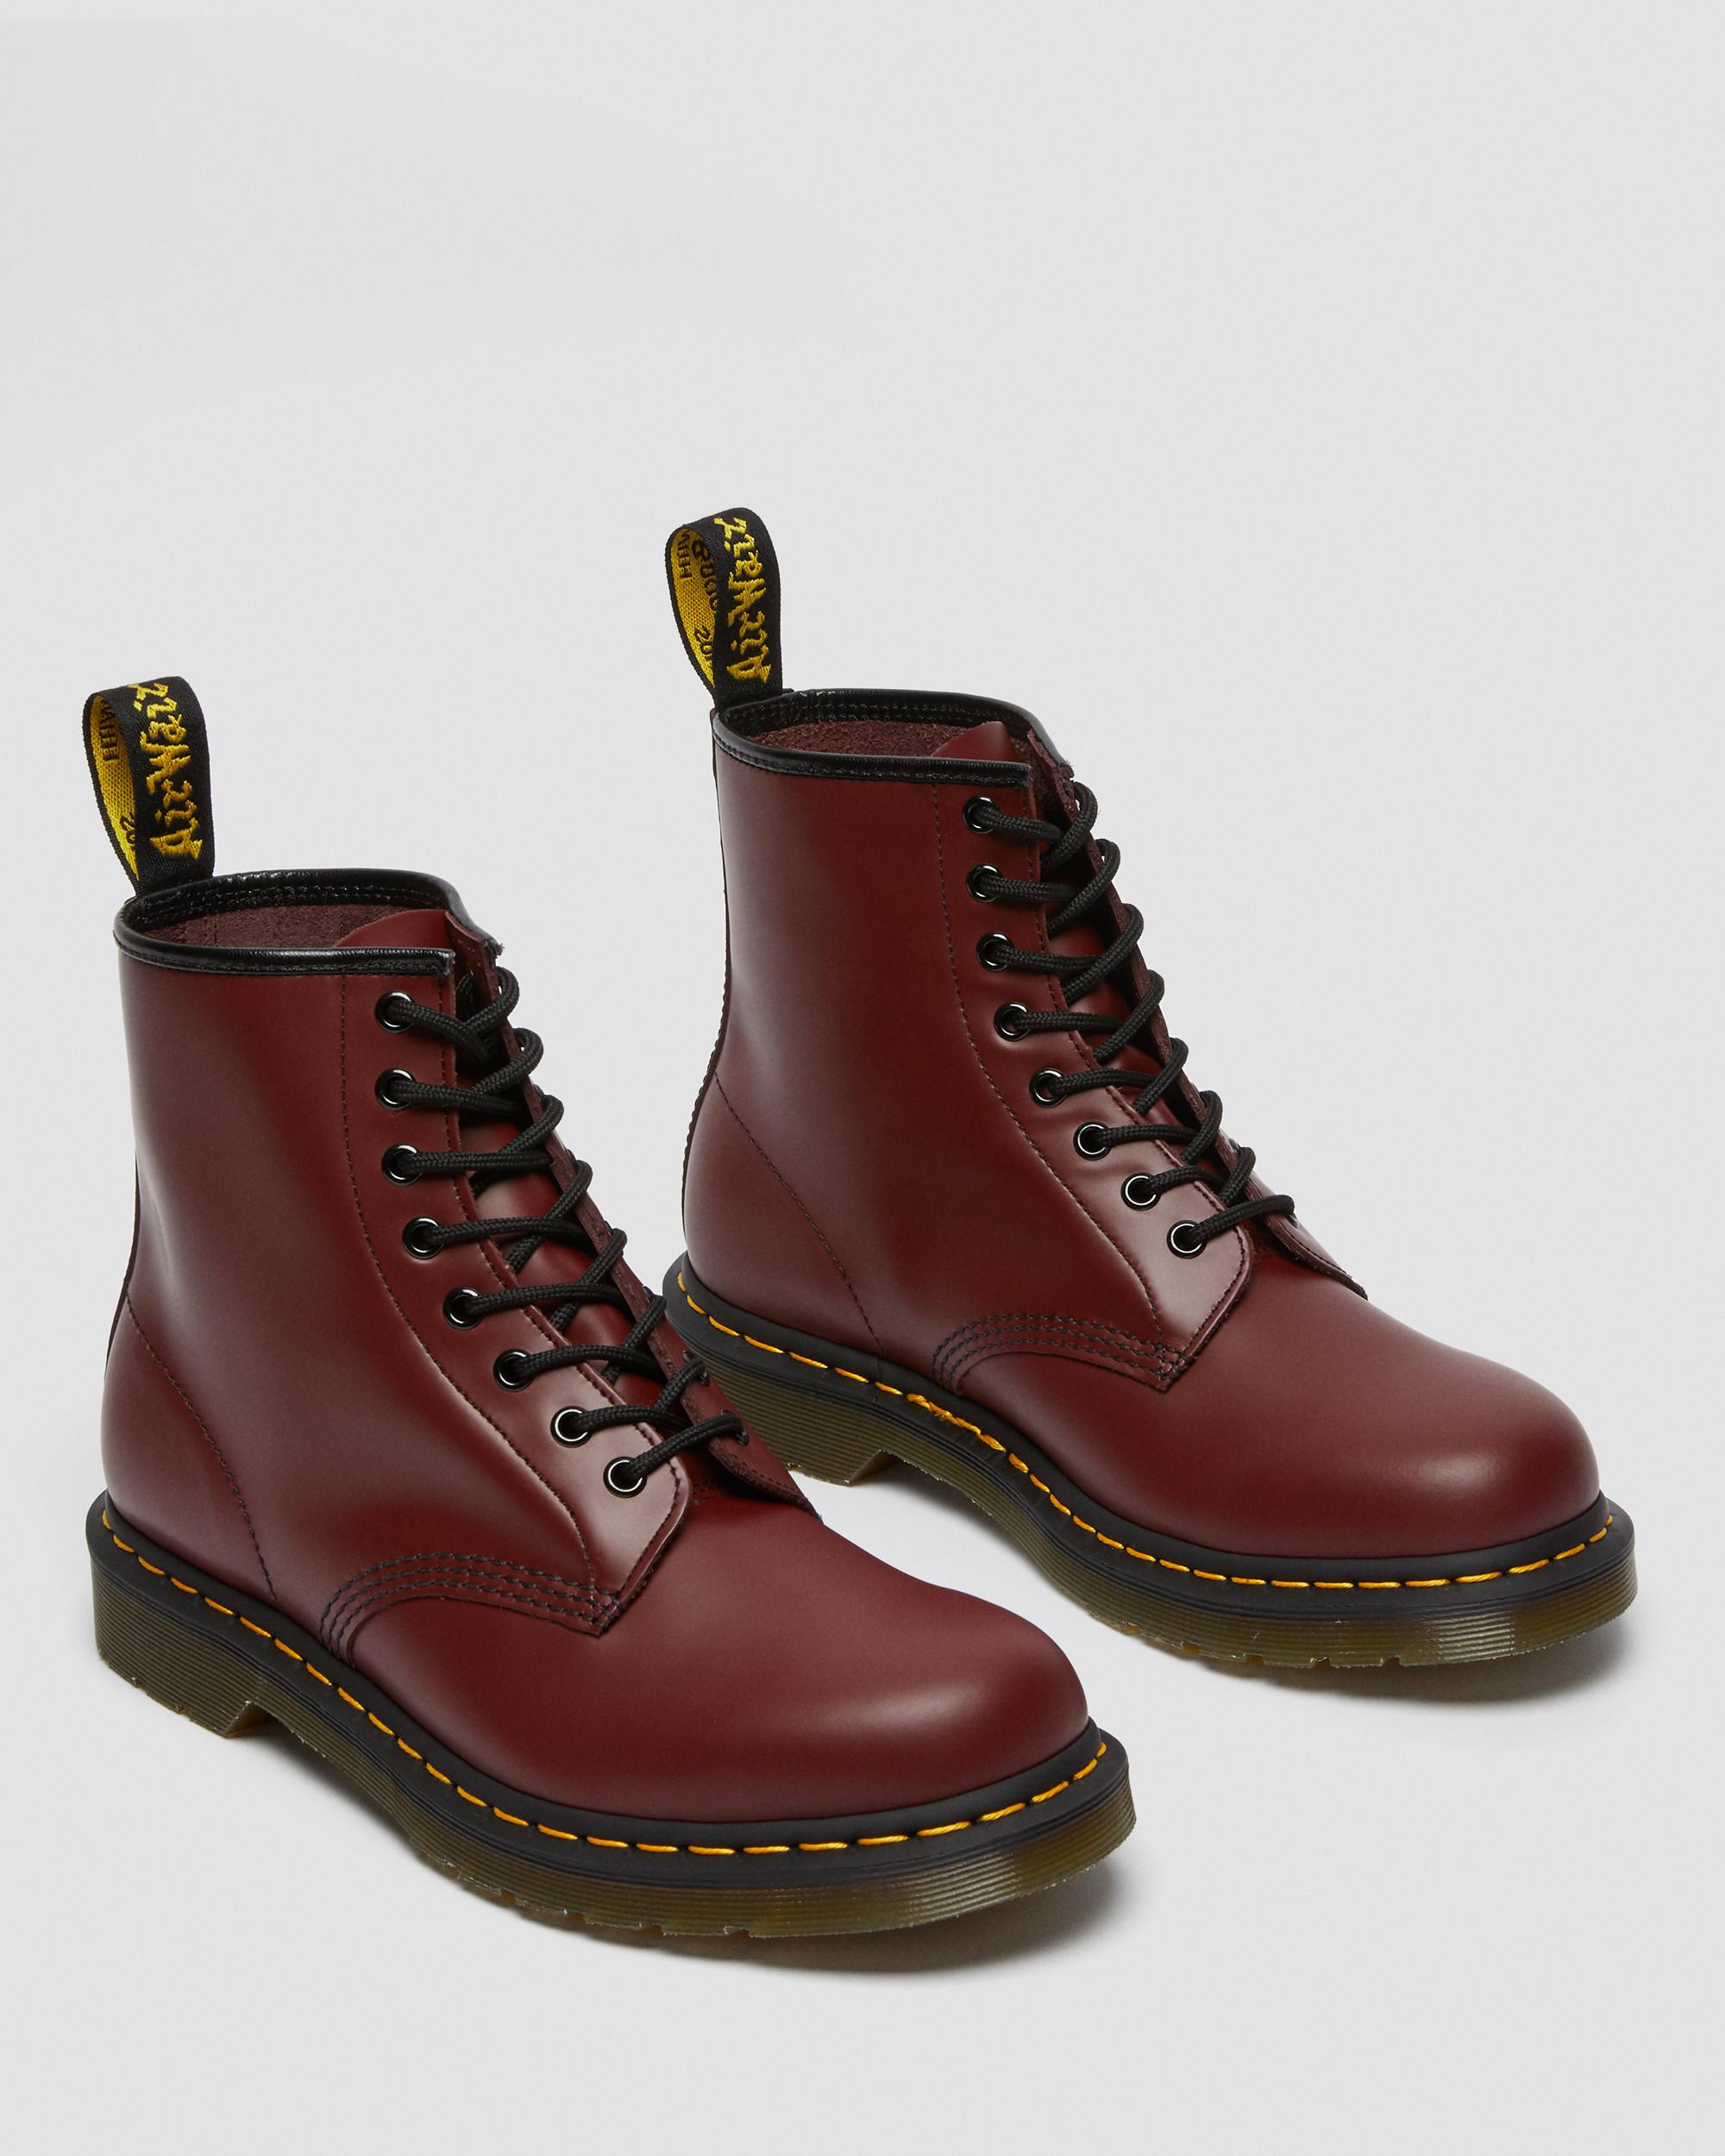 9 Doc Martens Outfits That Take Winter Style to the Next Level